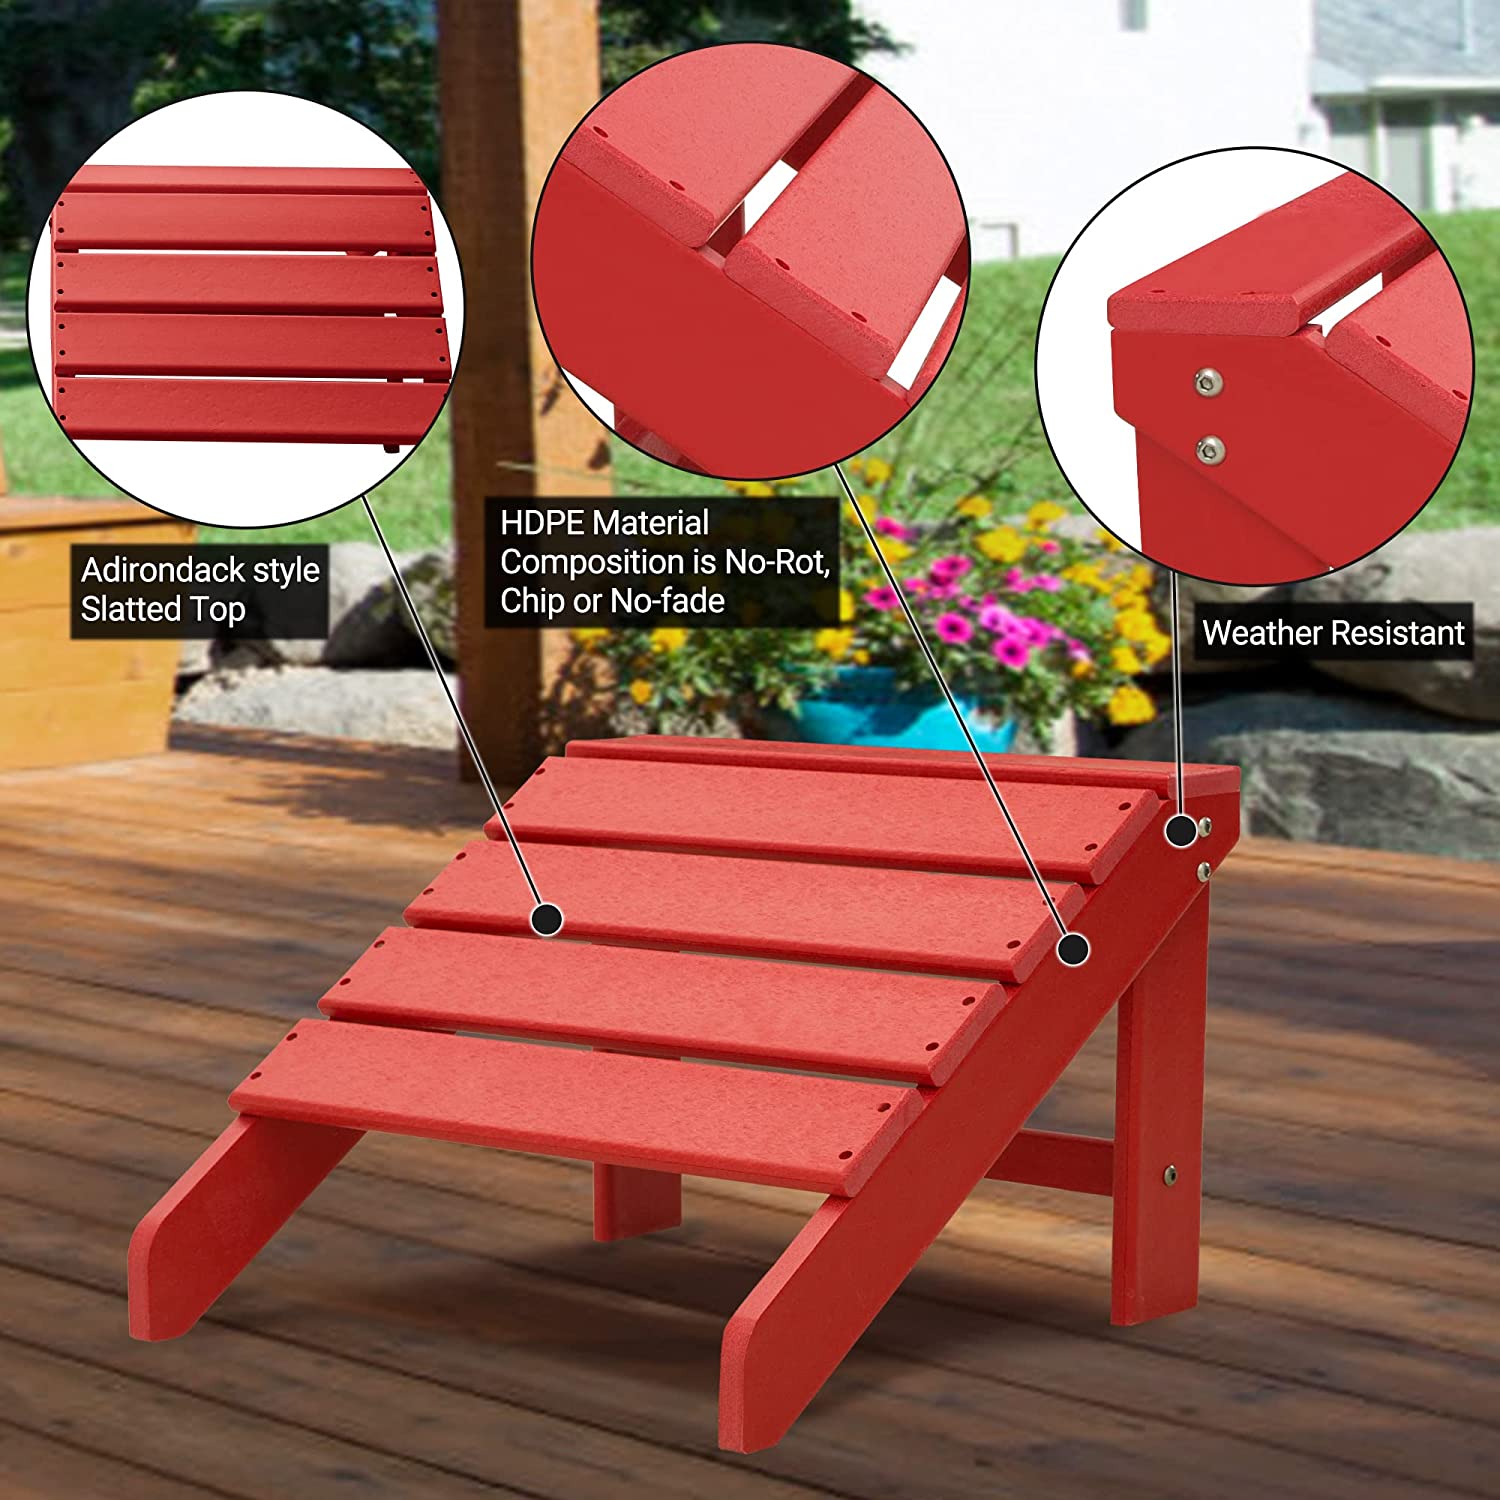 FHFO Adirondack Ottoman and Side Table for Adirondack Chairs, 2 Pieces Outdoor Adirondack Footrest & 1 Piece End Table, Weather Resistant Footstool Table for Adirondack Chair （Red） - image 3 of 5